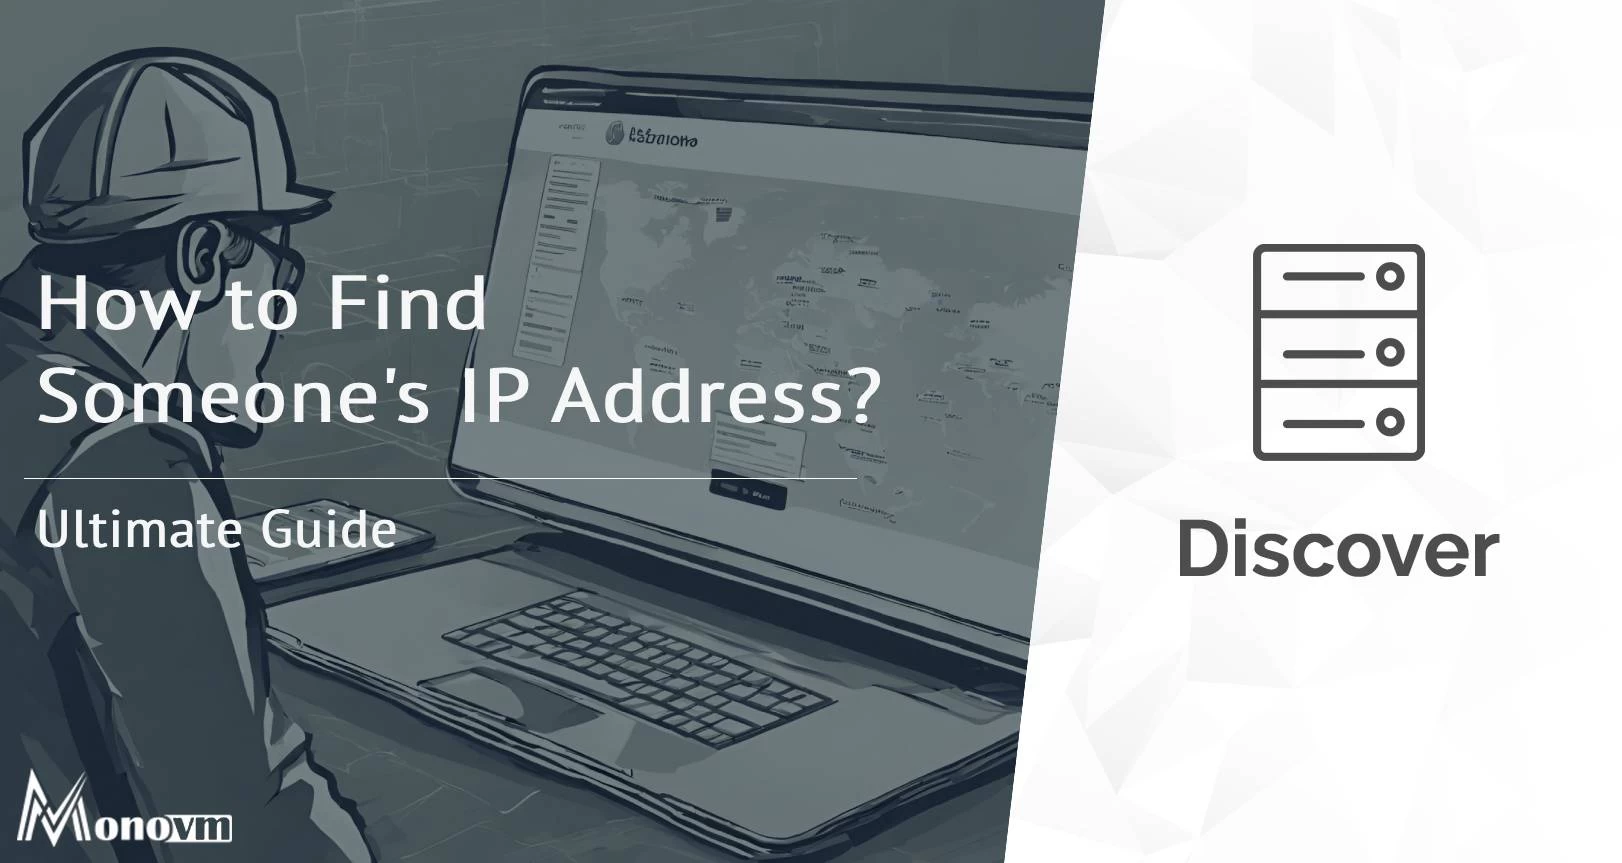 How to Find Someone's IP Address?